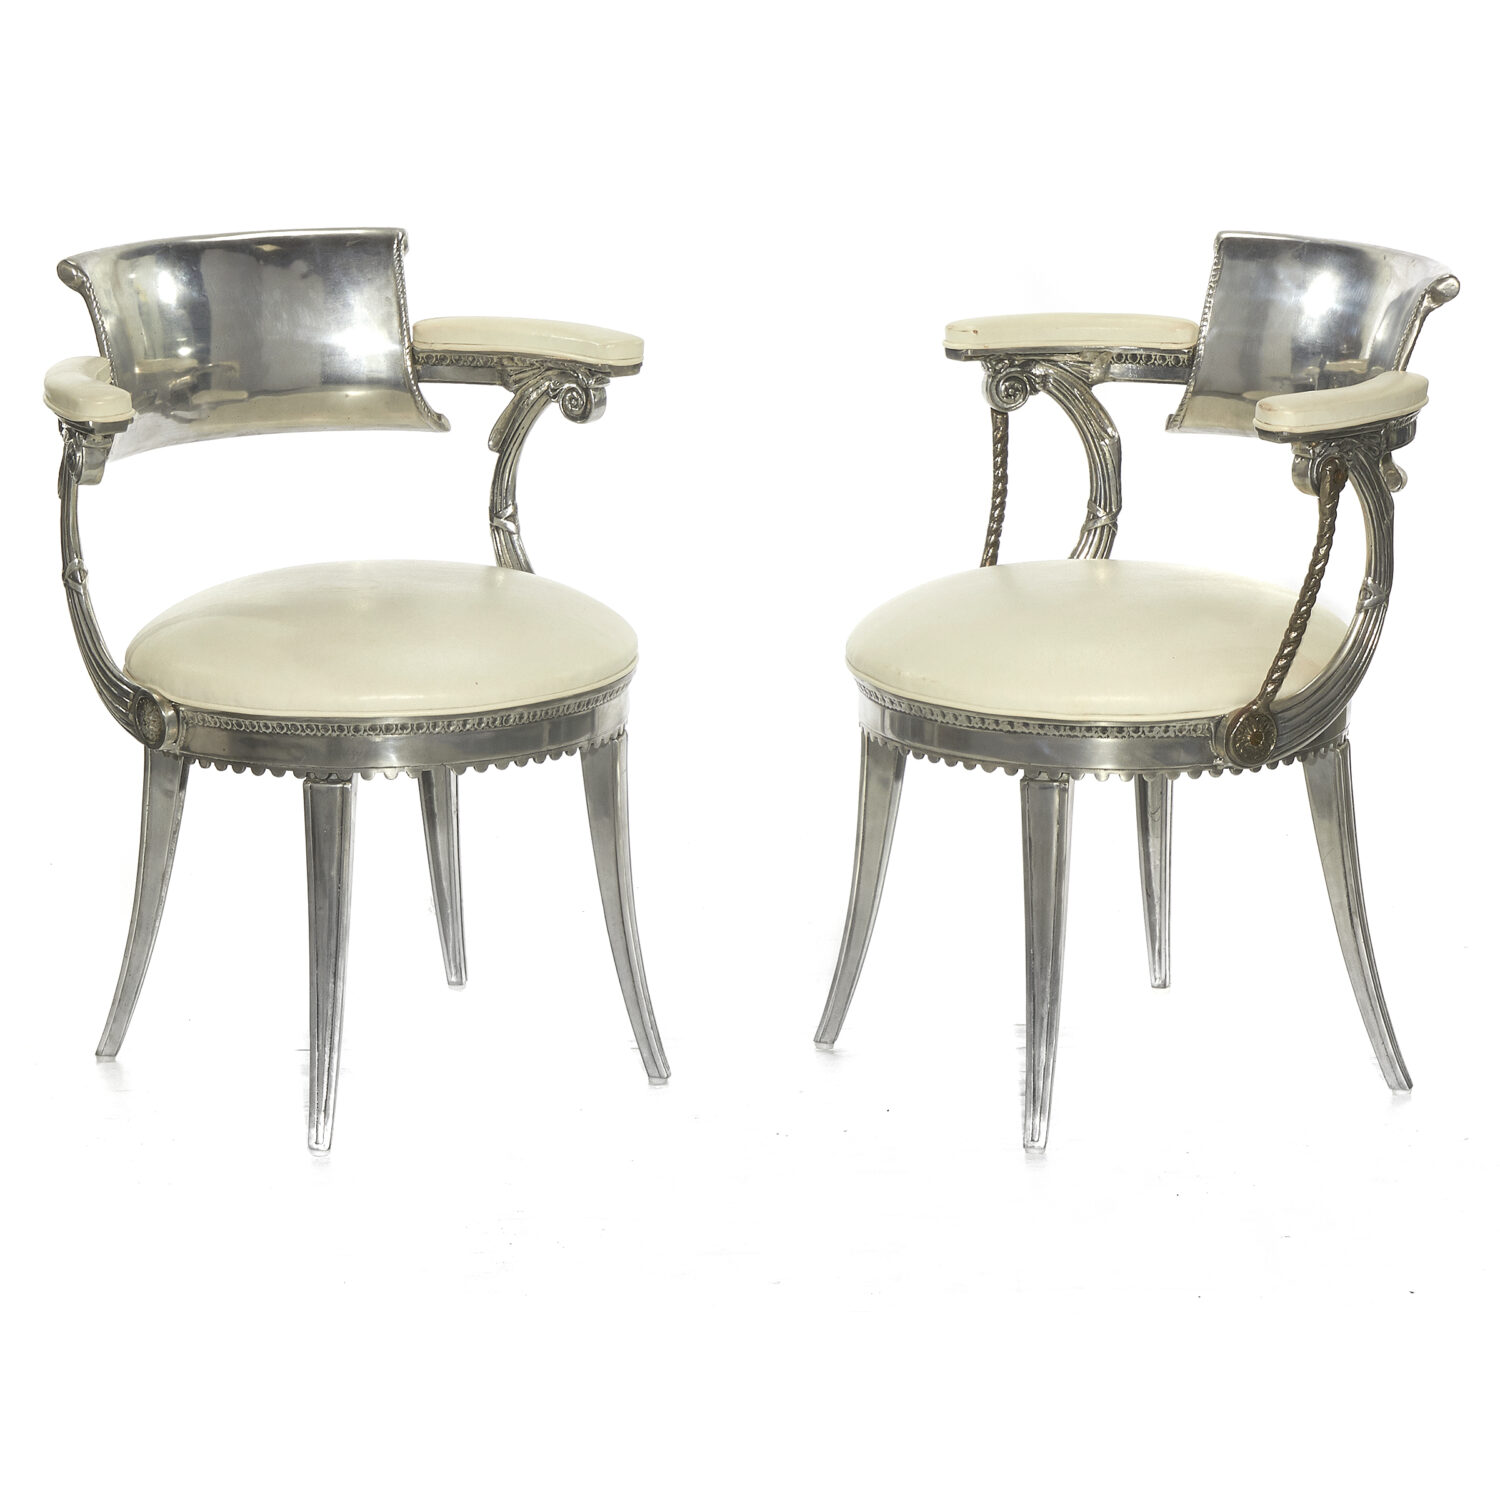 <p><a href="https://auctions.finesf.com/online-auctions/fine-estate-inc/six-art-deco-dorothy-draper-design-chairs-3091441">Dorothy Draper Chairs Available at Auction on July 24th 11am</a></p>